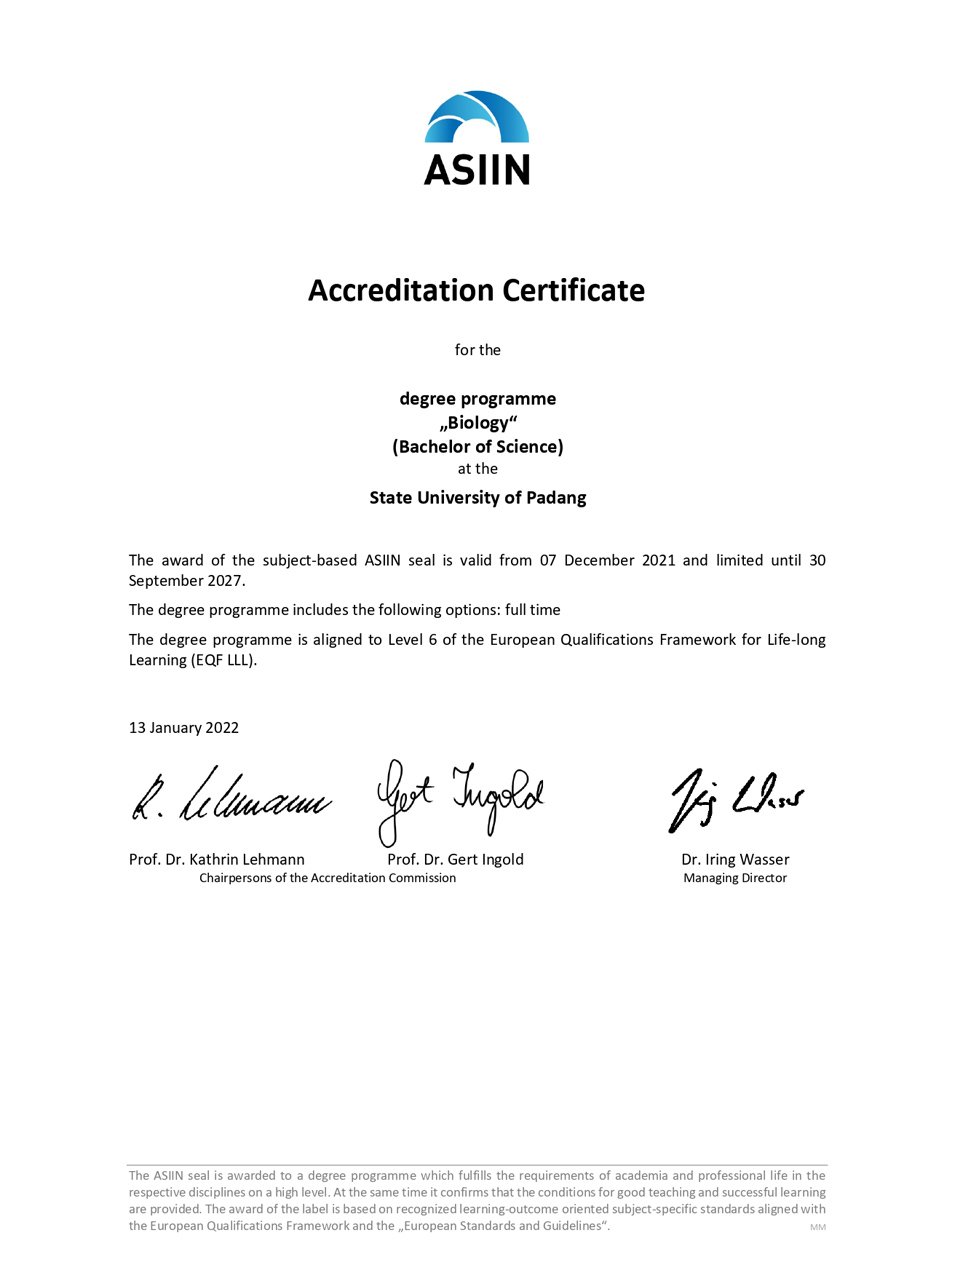 ASIIN Accreditation Certificate for Biology Study Program